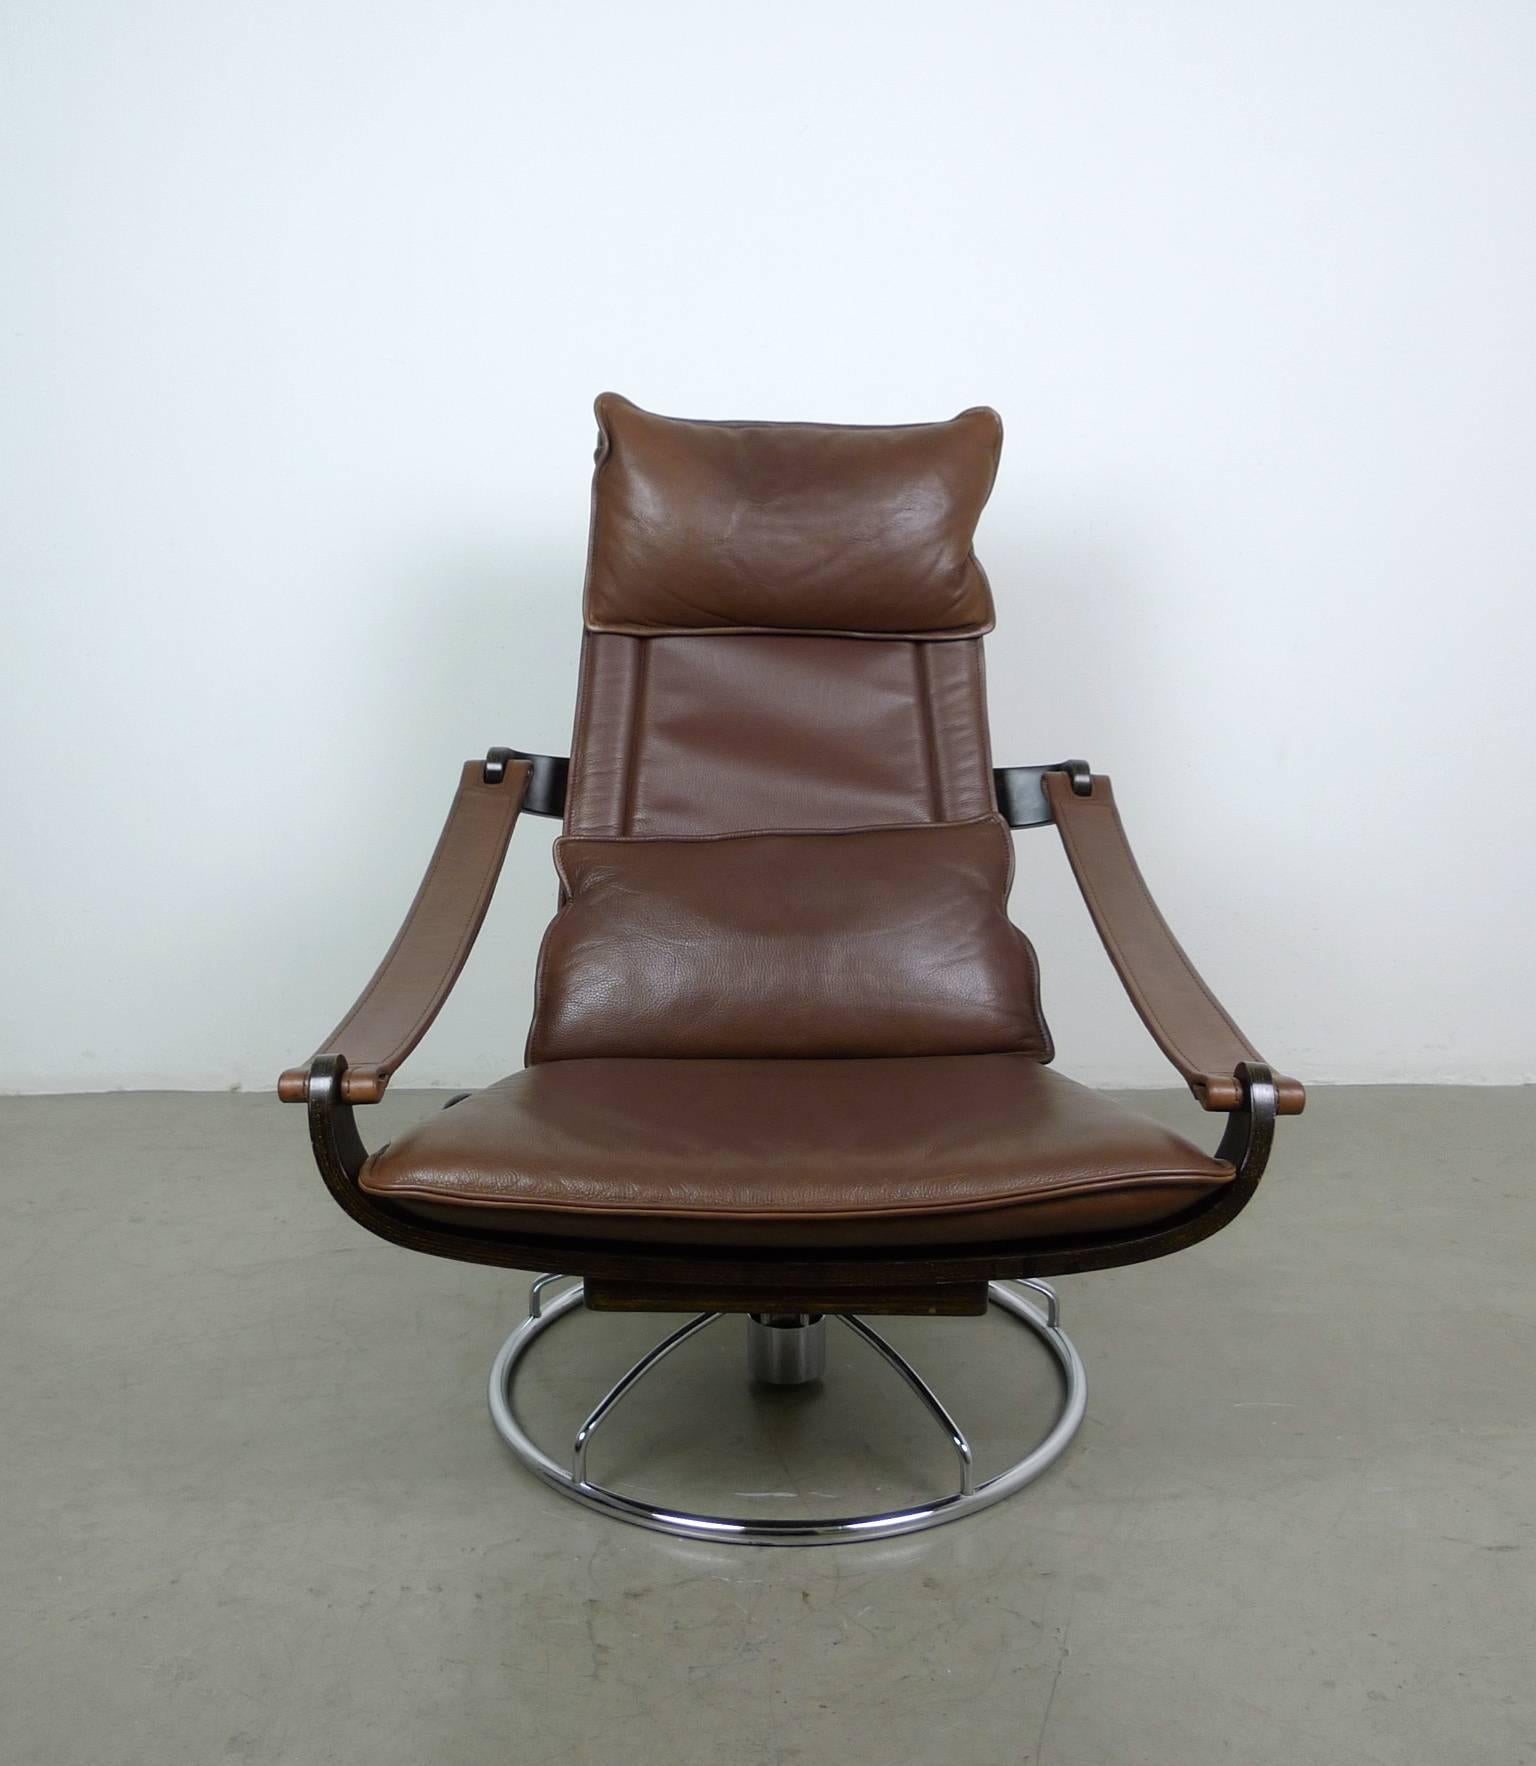 This lounge chair features slim dark brown leather cushions on a chromed swivel base. The frame is composed of individual bent plywood elements. On the right side of the frame is a lever with a large wooden ball, which serves to lock or lower the